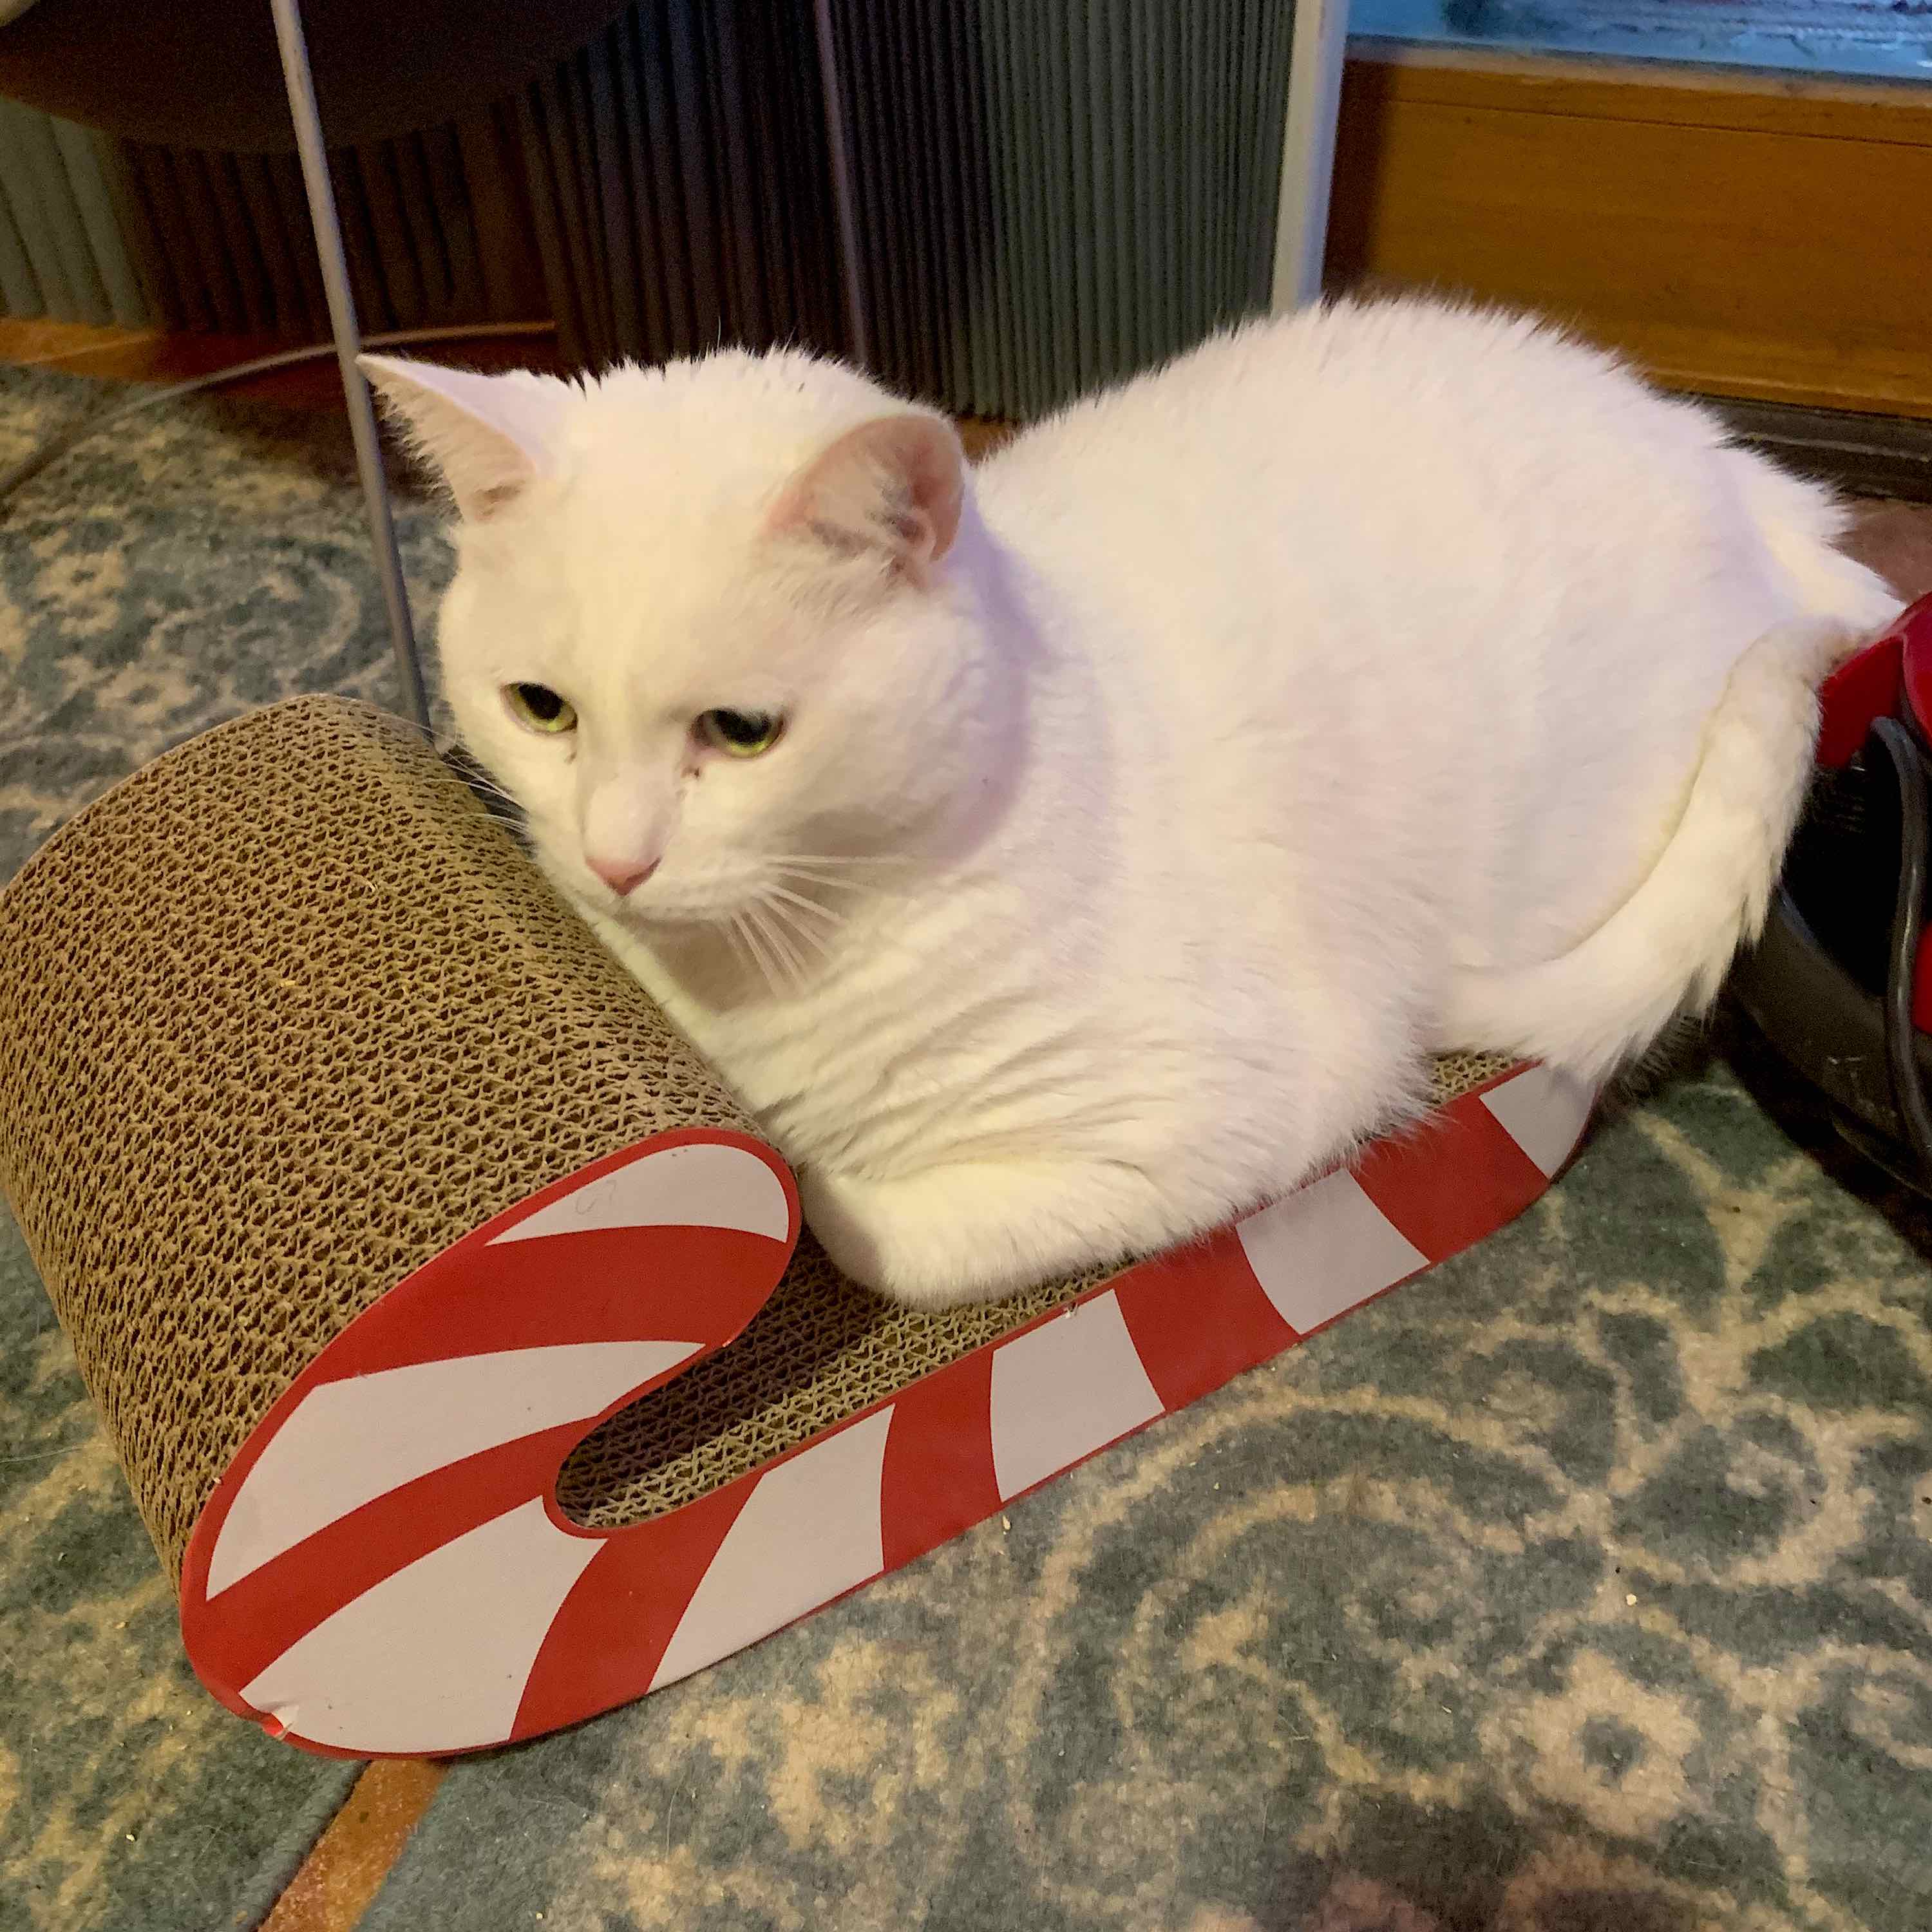 This is Sasha, my 5-year-old kitty, taking a ride on his catnip sleigh! I adopted him when he was 6 weeks old along with his mom, Sofya, a stray who had 6 kittens only days after being rescued off the street. Sasha and Sofya look exactly alike. Love your column! – Karen McCarthy, Longmeadow, Mass